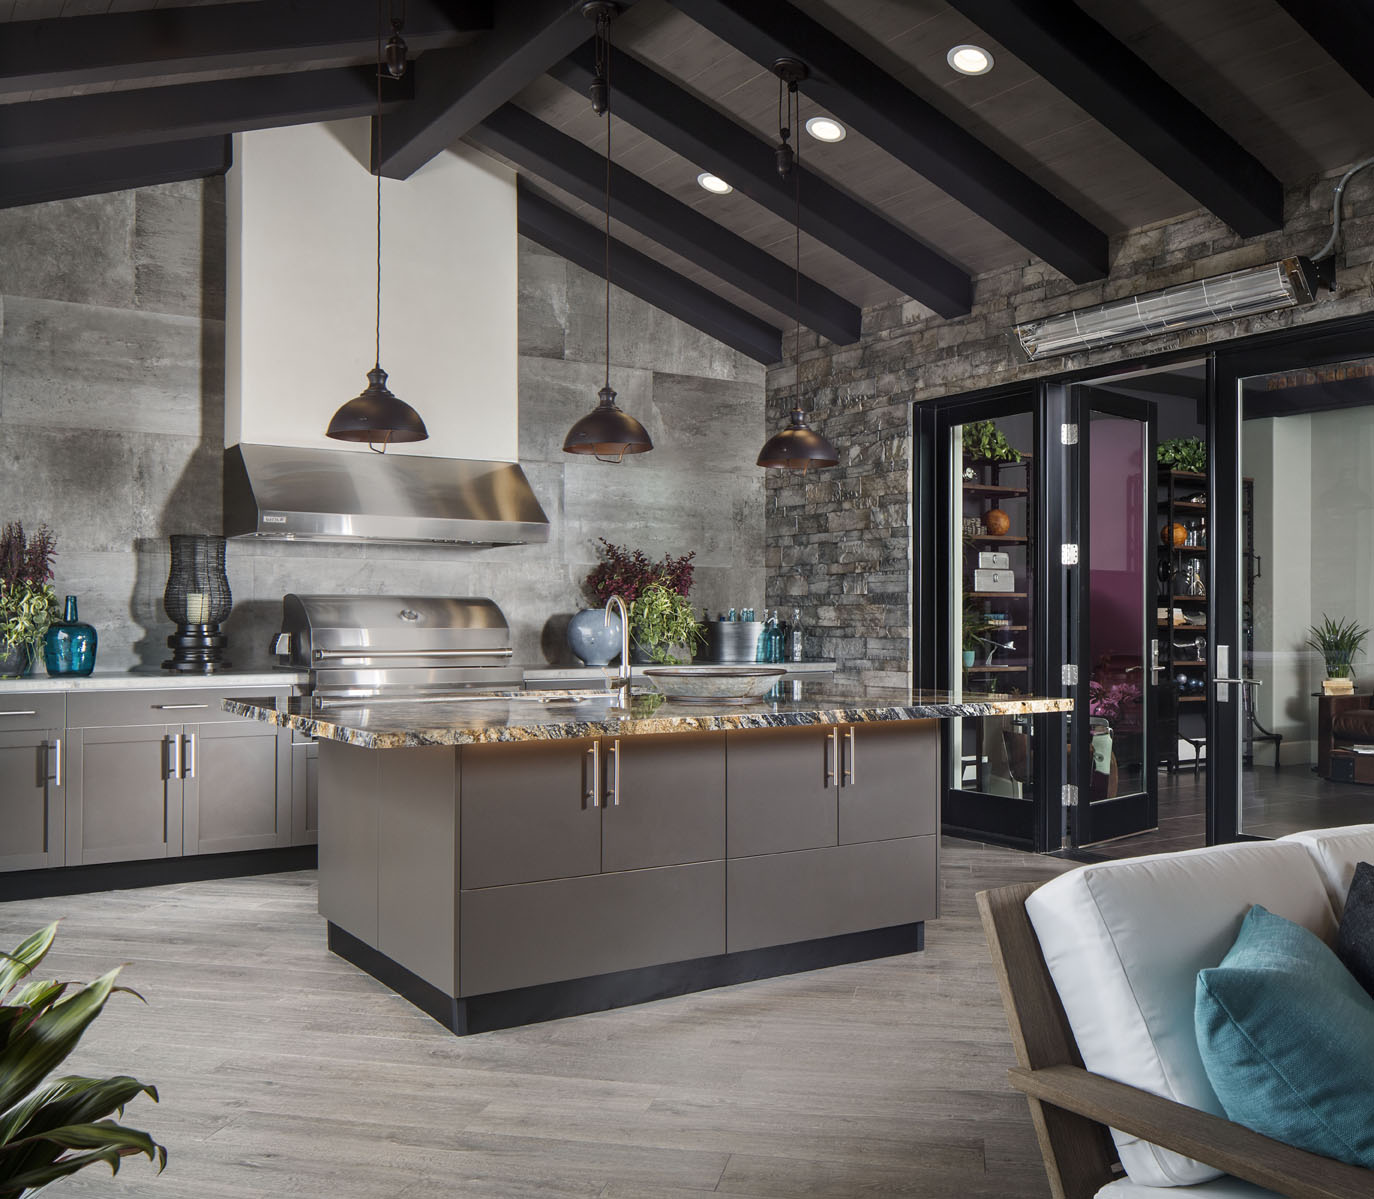 Outdoor kitchen in Rancho Santa Fe, California with cabinetry by Danver.